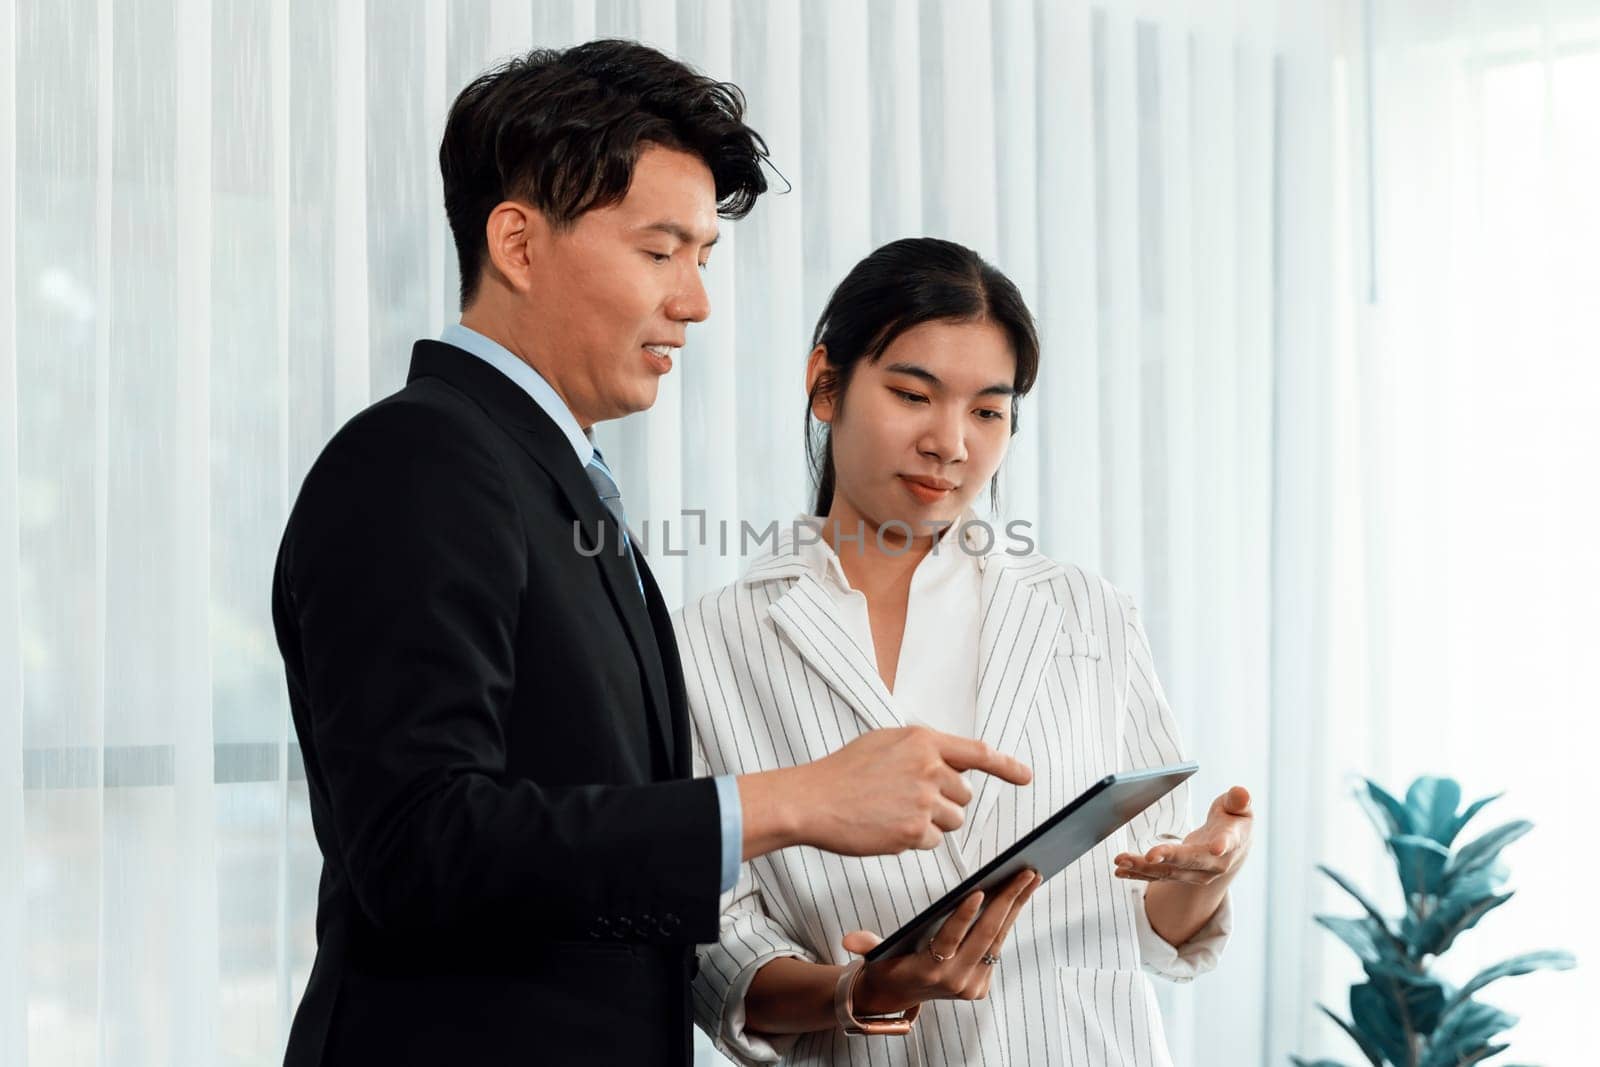 Manager advising guiding younger colleague with tablet in workplace. Couple businesspeople in formal wear working together on financial strategy as concept of teamwork and harmony in office.